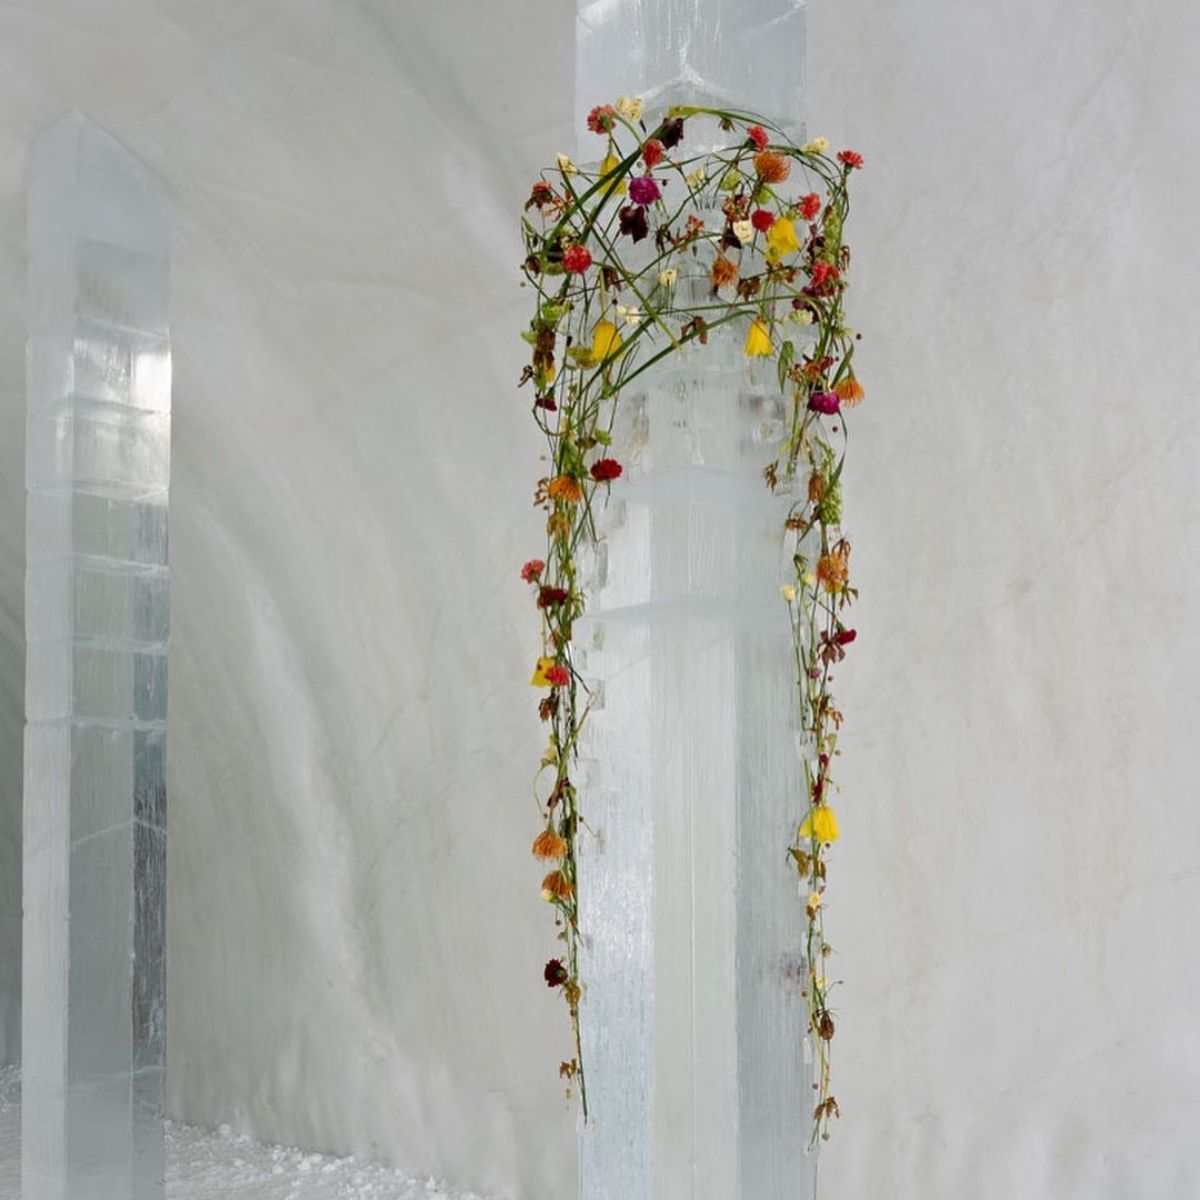 Flowers and Ice at Icehotel - On Thursd